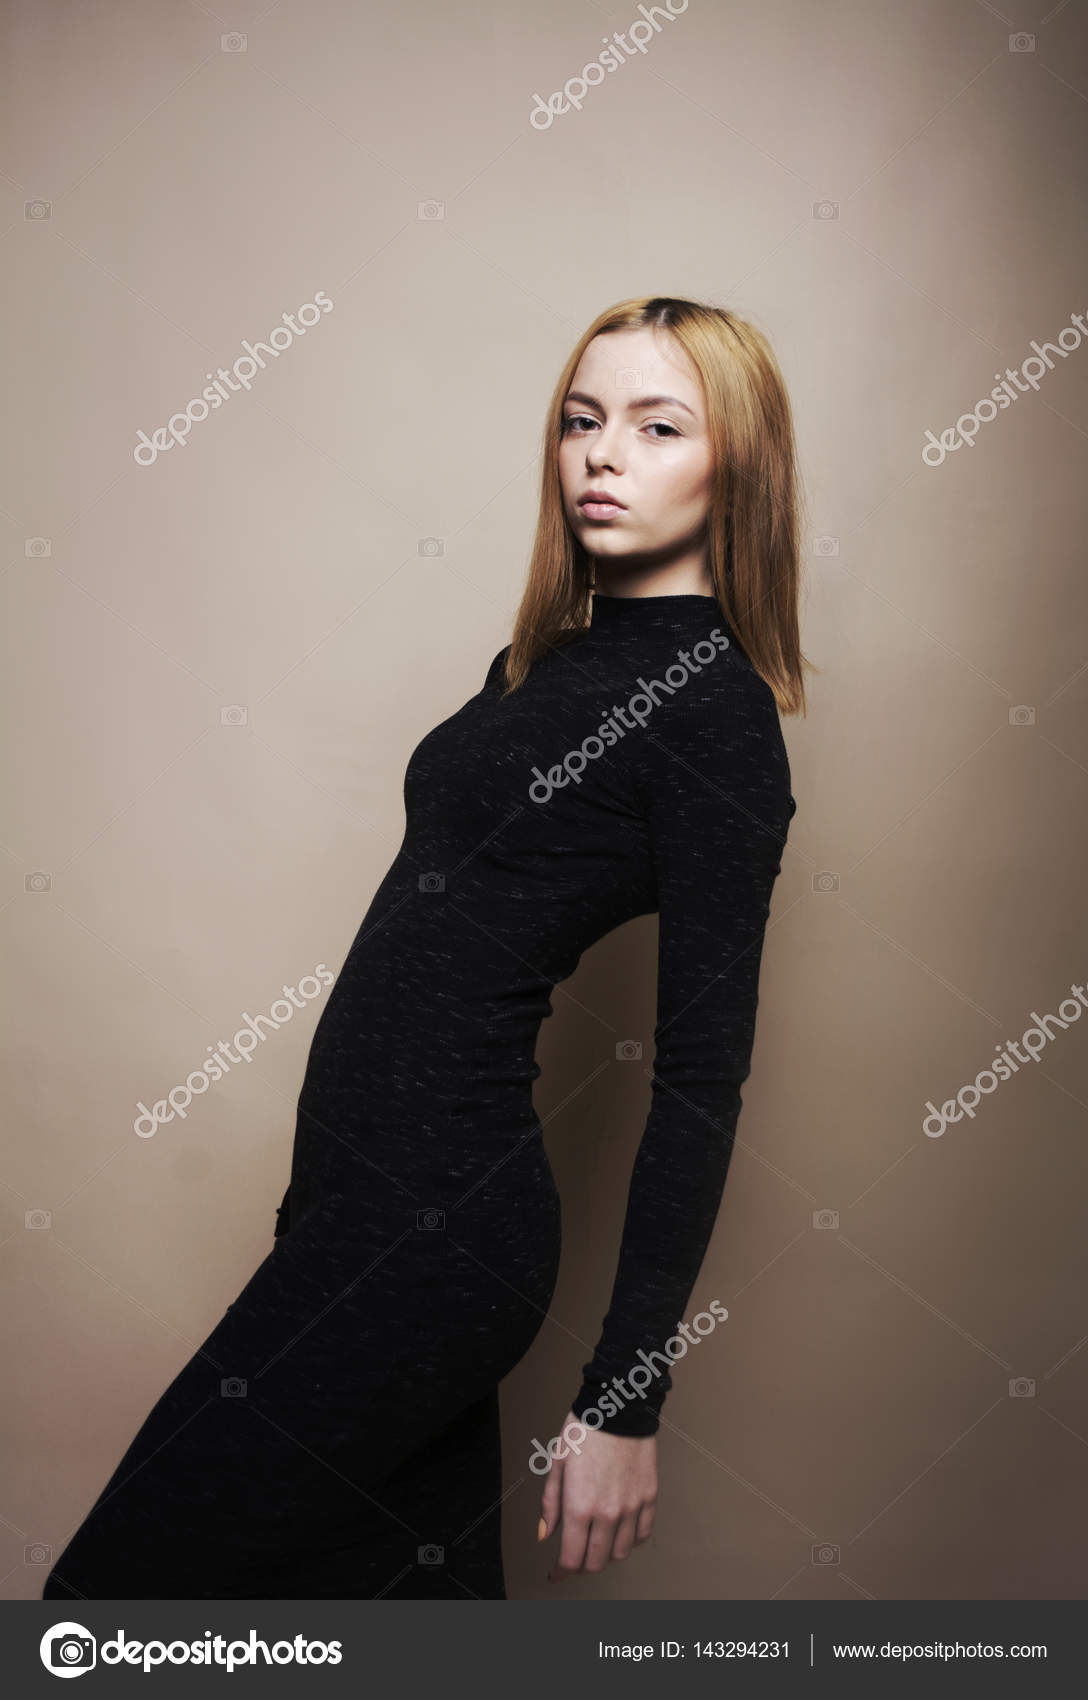 Sad girl on a beige background, in a black dress. Blond girl with short ...